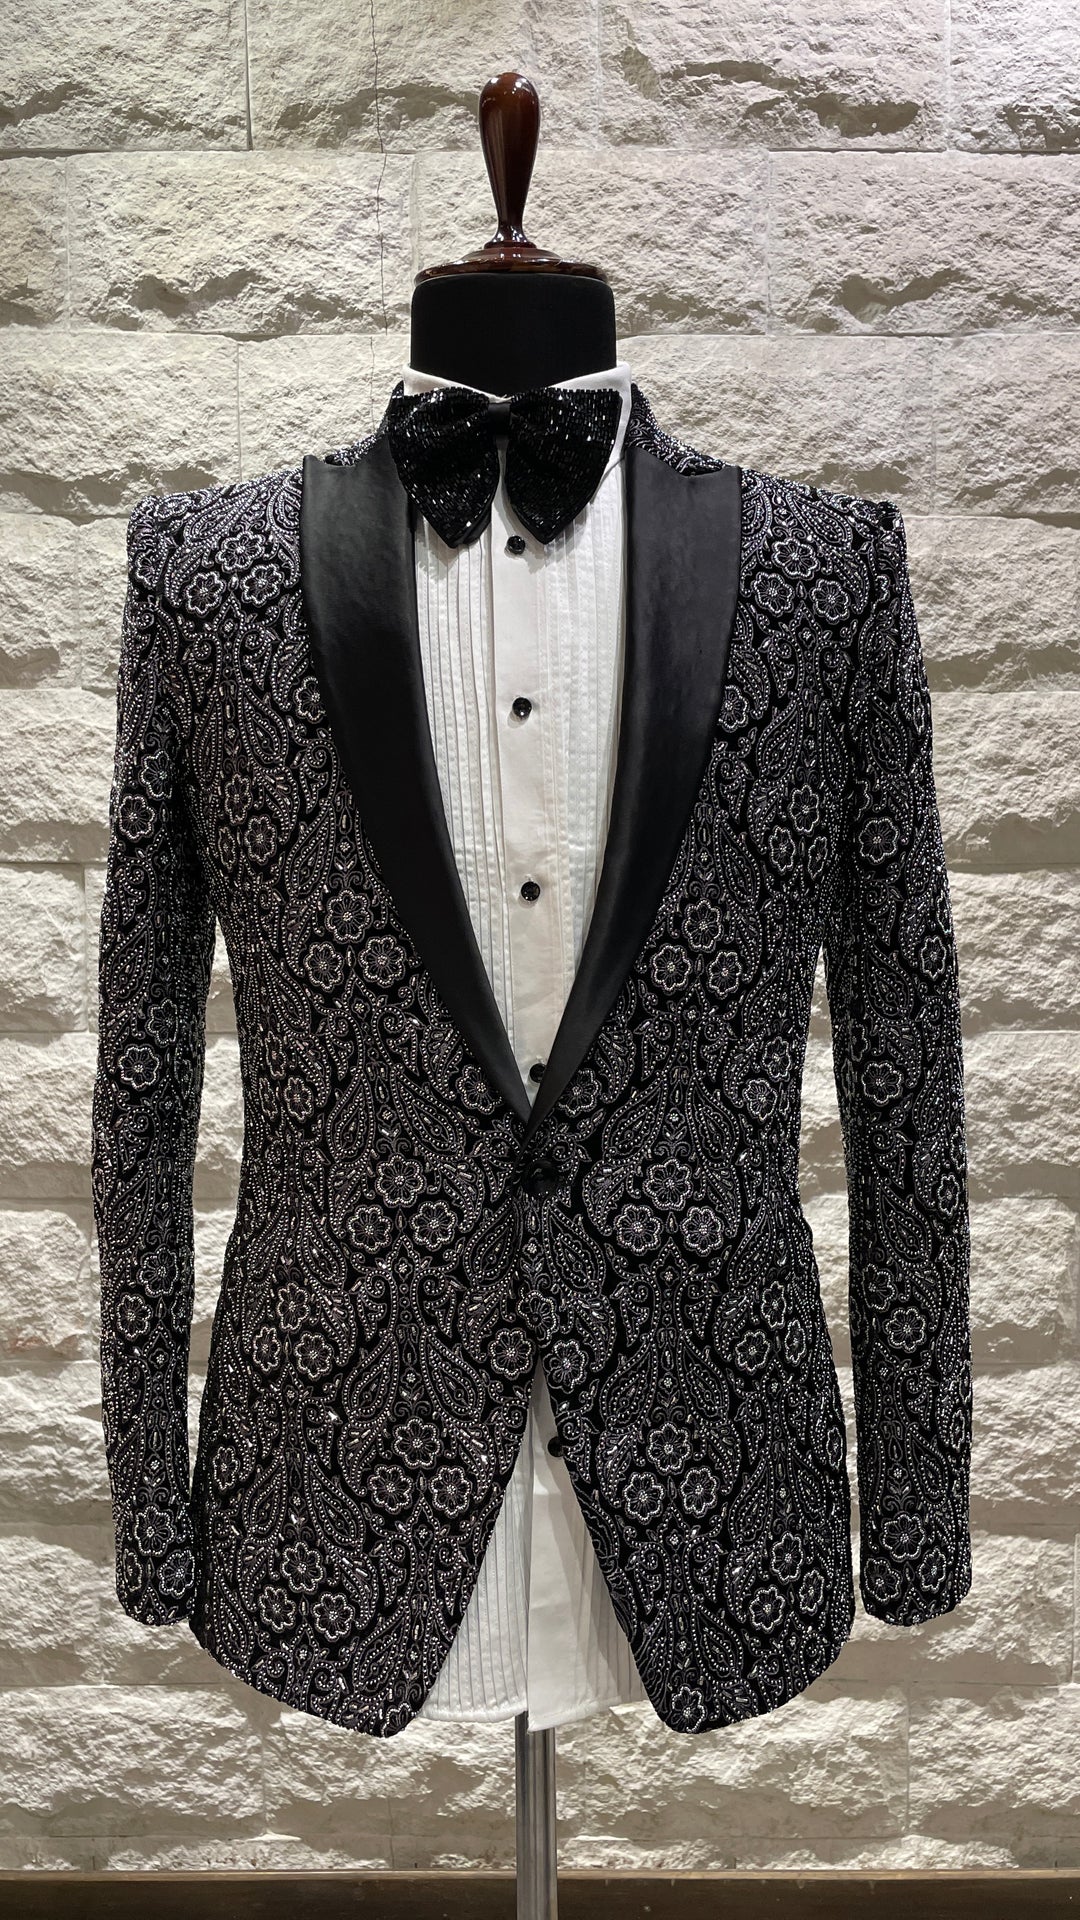 Black tuxedo with silver detailings